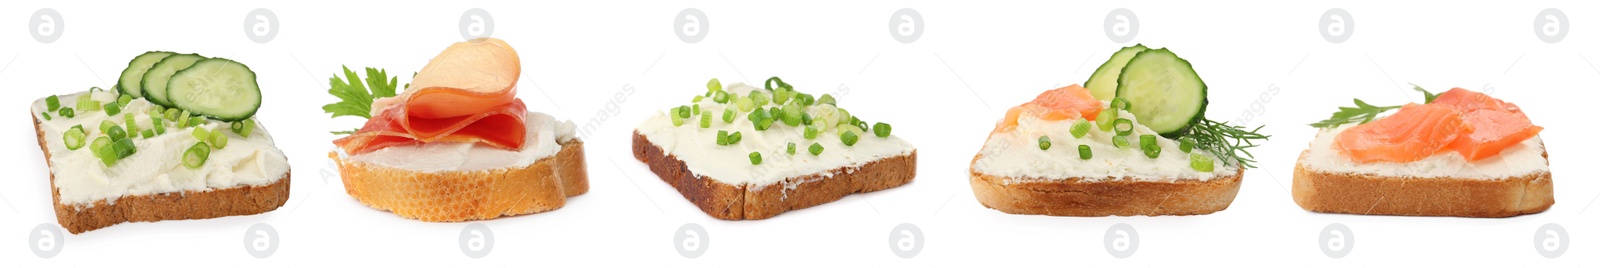 Image of Bread with cream cheese and toppings on white background, collage. Banner design 